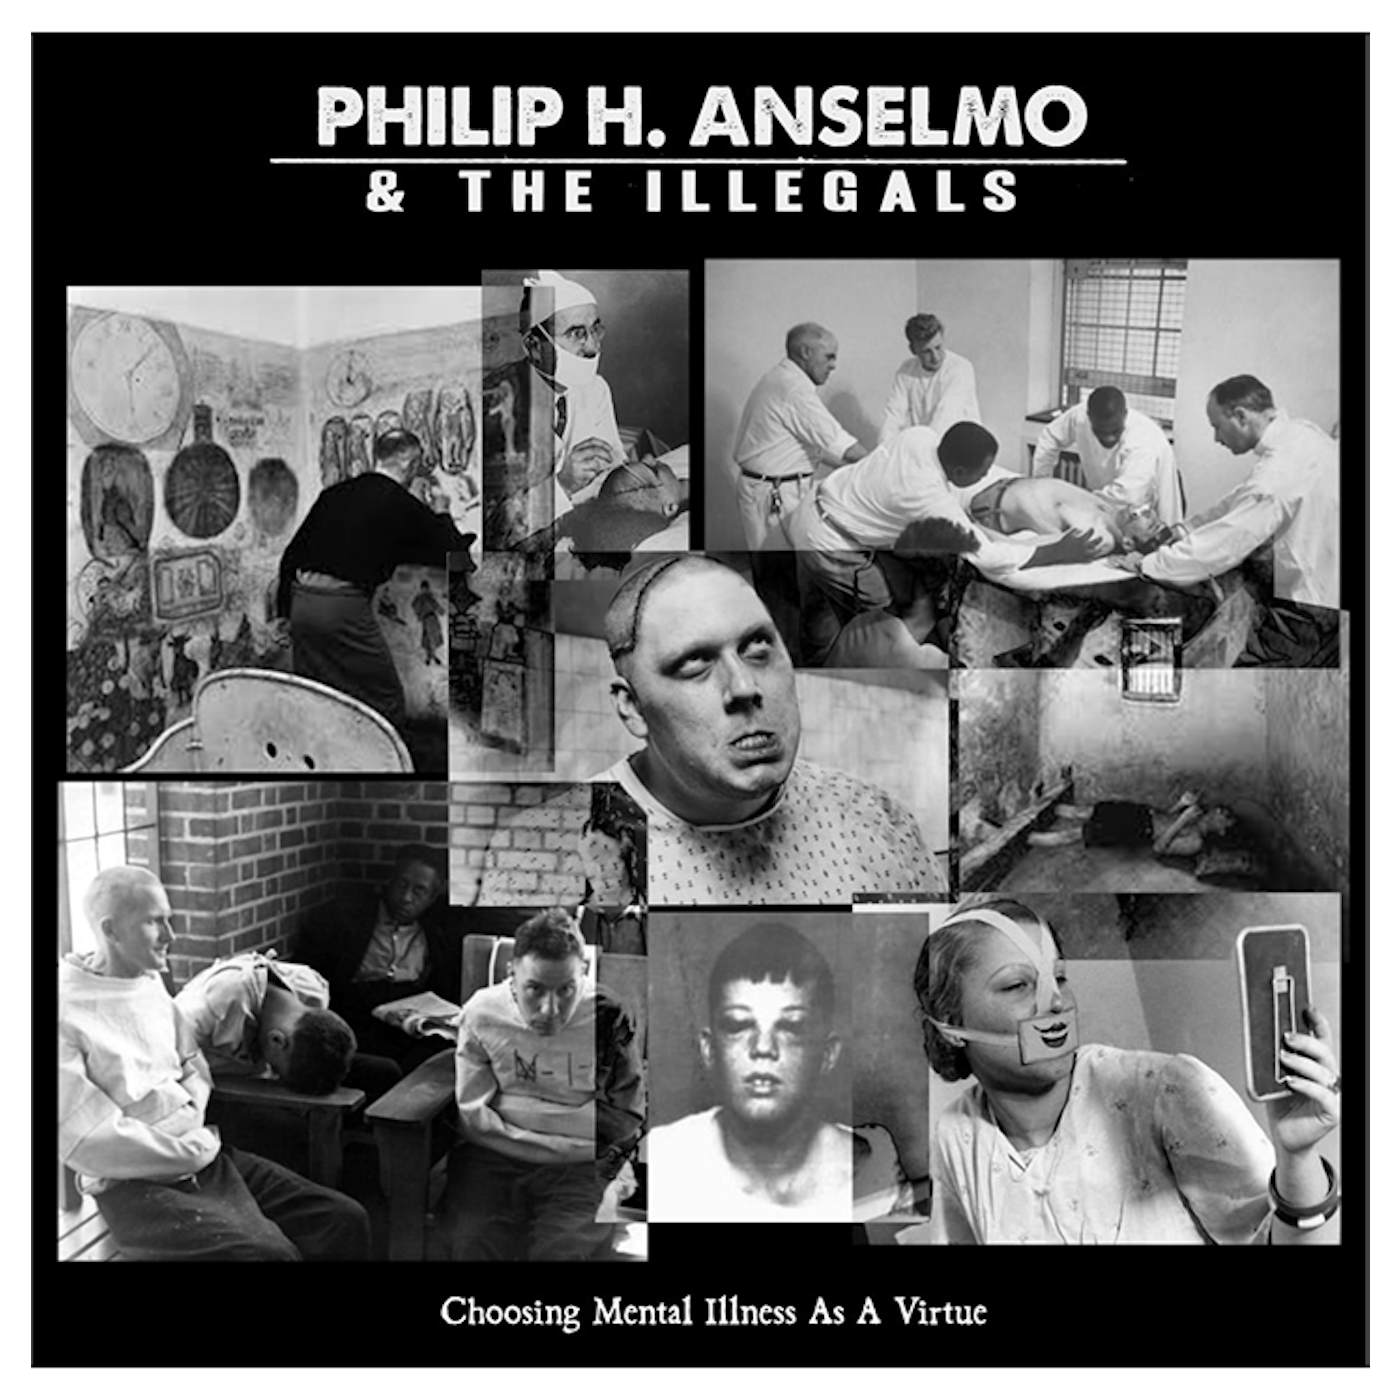 Philip H. Anselmo and The Illegals - 'Choosing Mental Illness As A Virtue' DigiCD